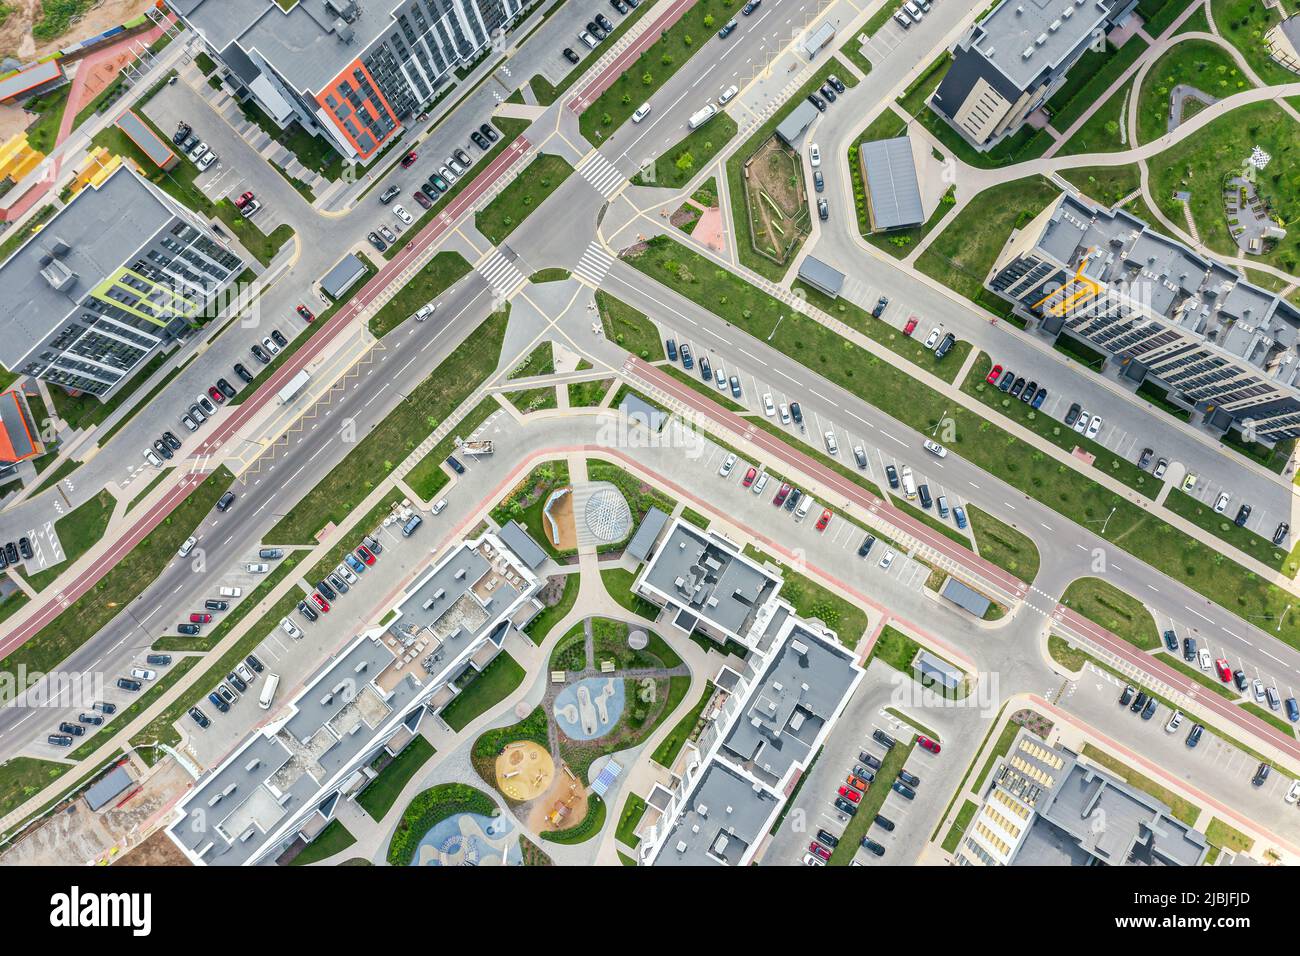 residential area with modern apartment buildings, parking lots, cars, playgrounds. aerial top view. Stock Photo